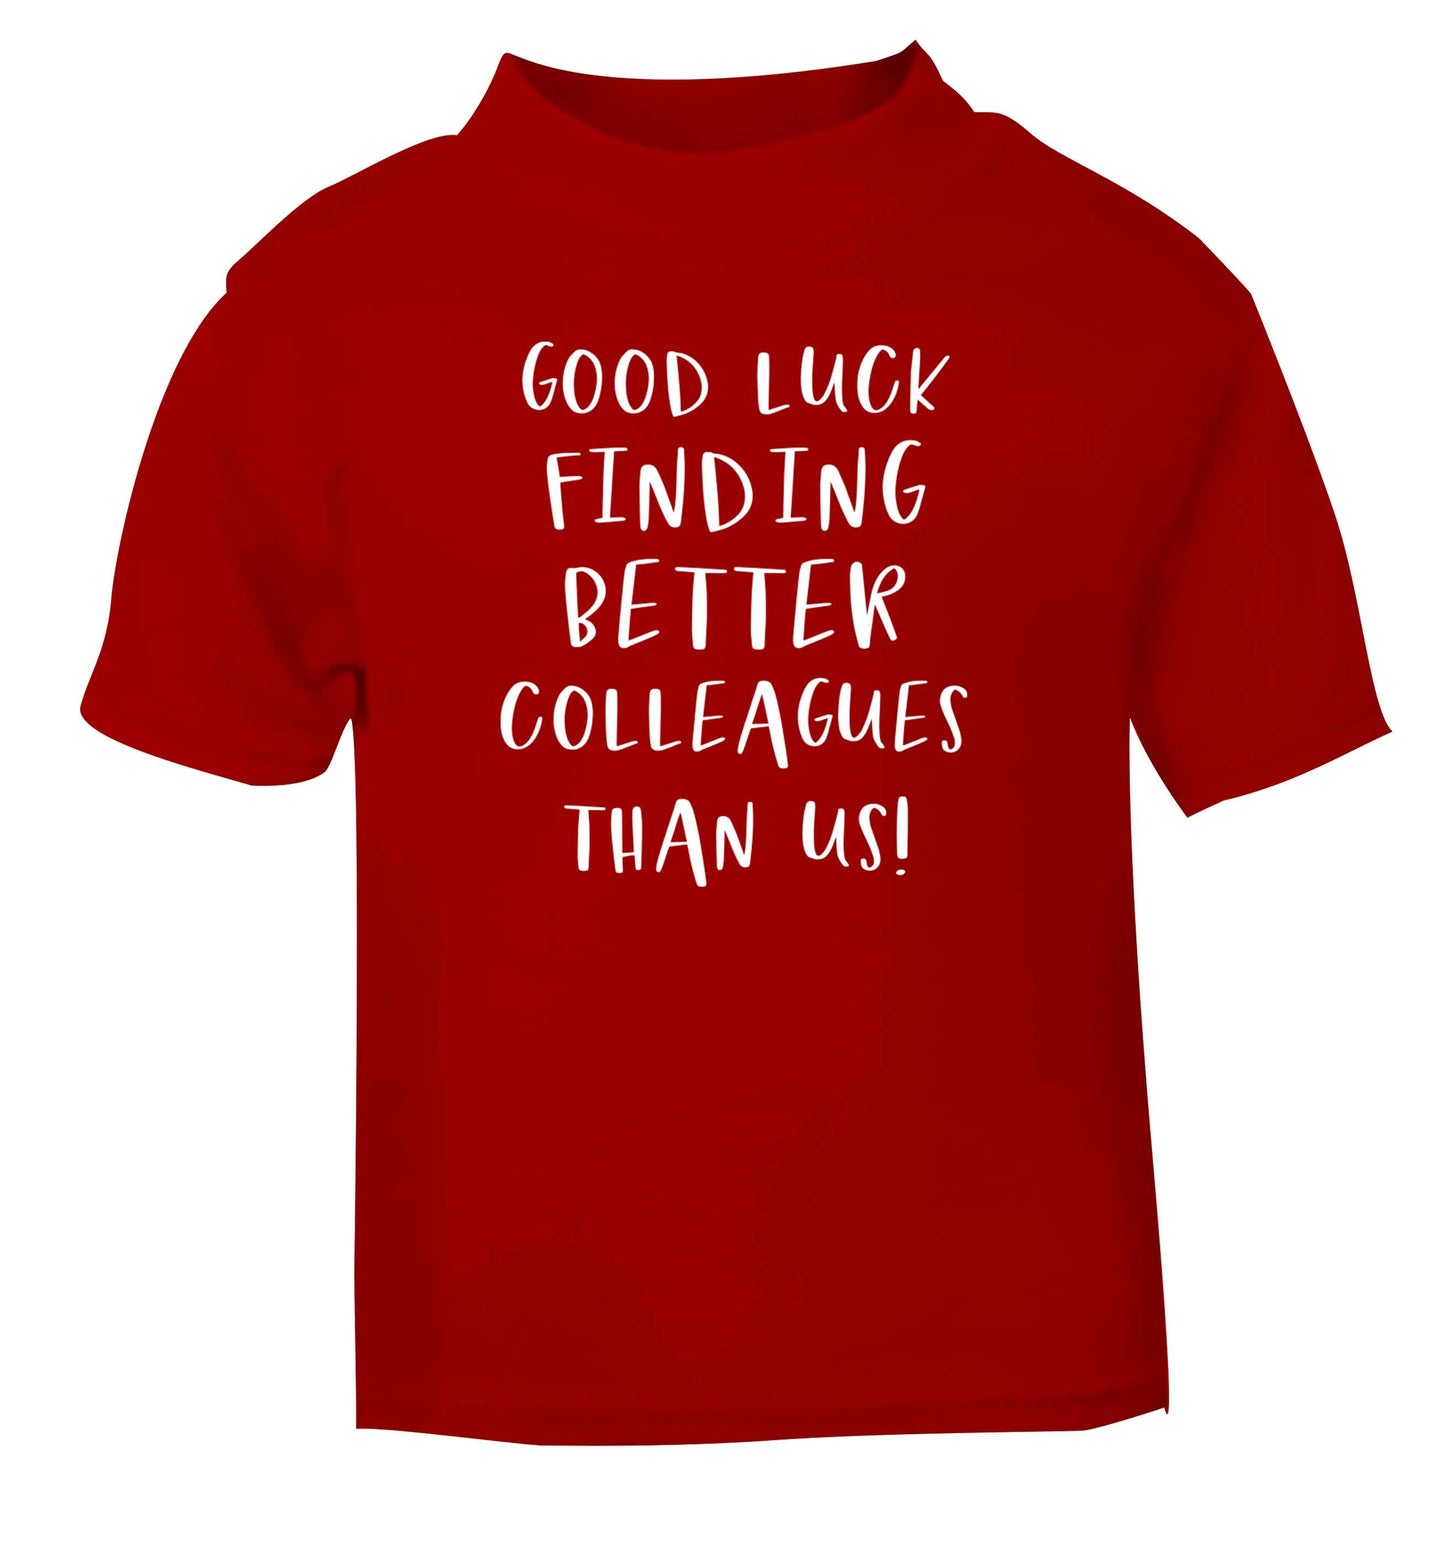 Good luck finding better colleagues than us! red Baby Toddler Tshirt 2 Years